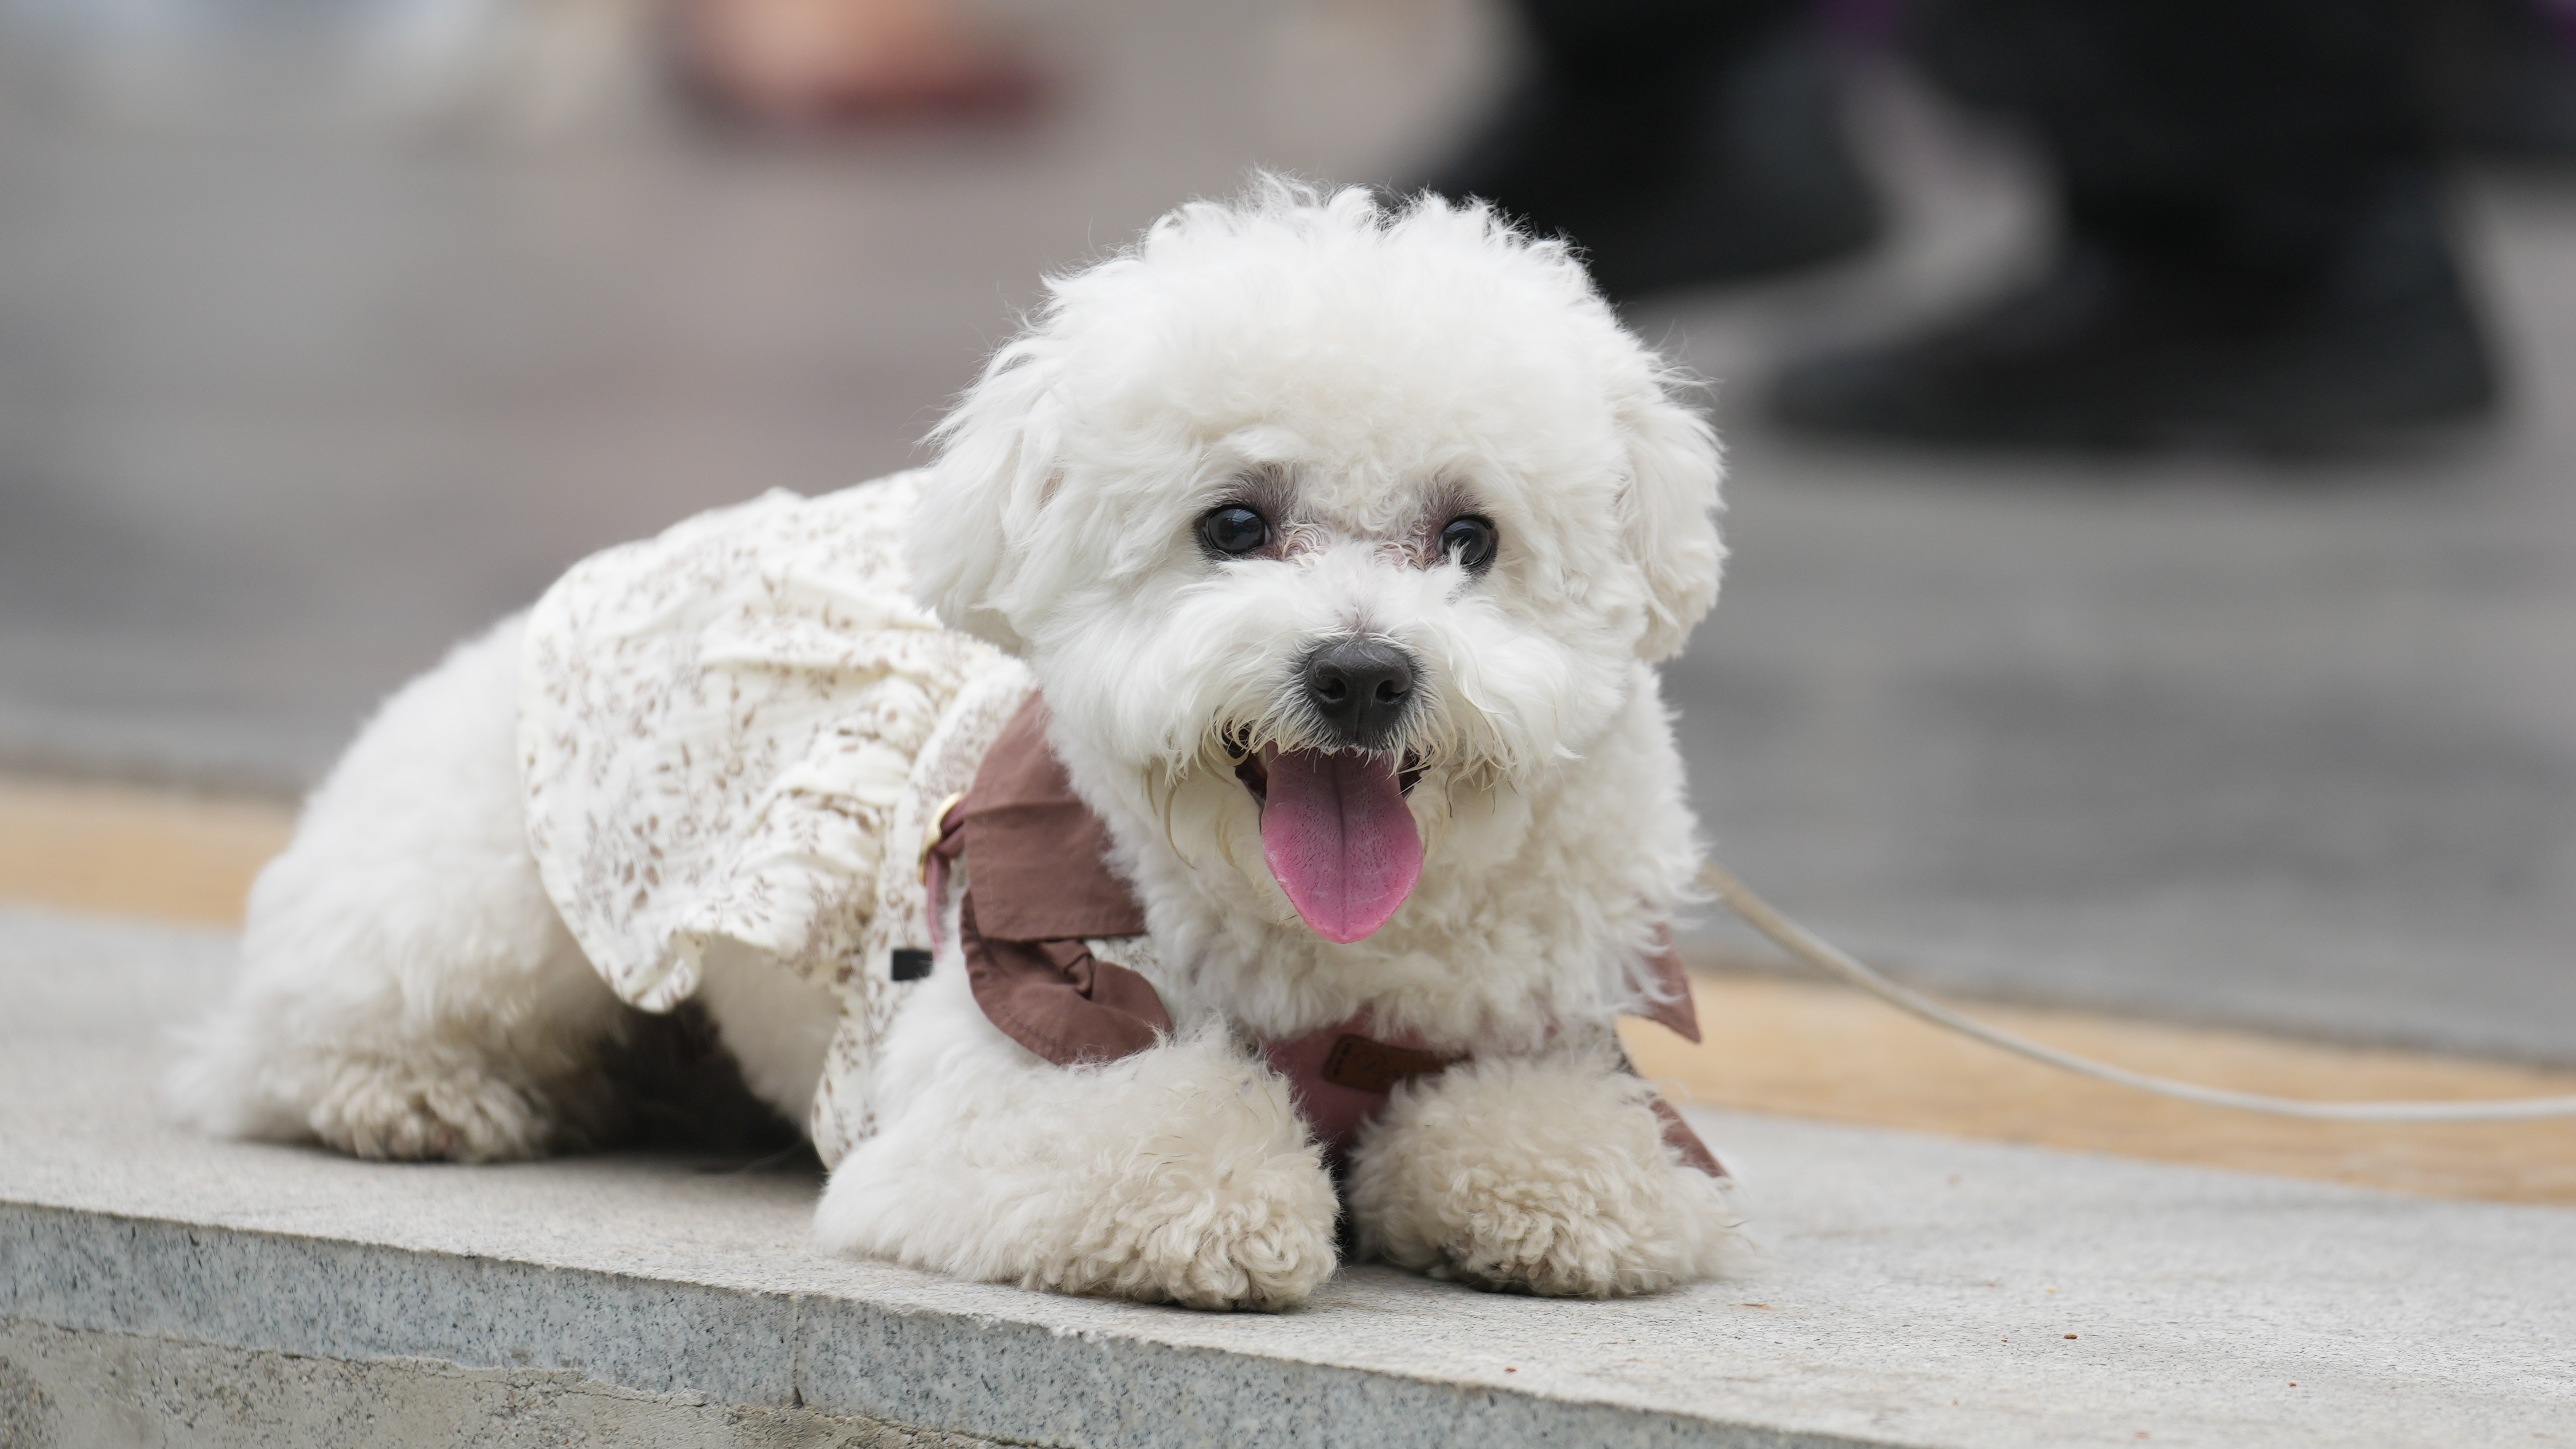 A dog pictured in clothes. /Chen Bo